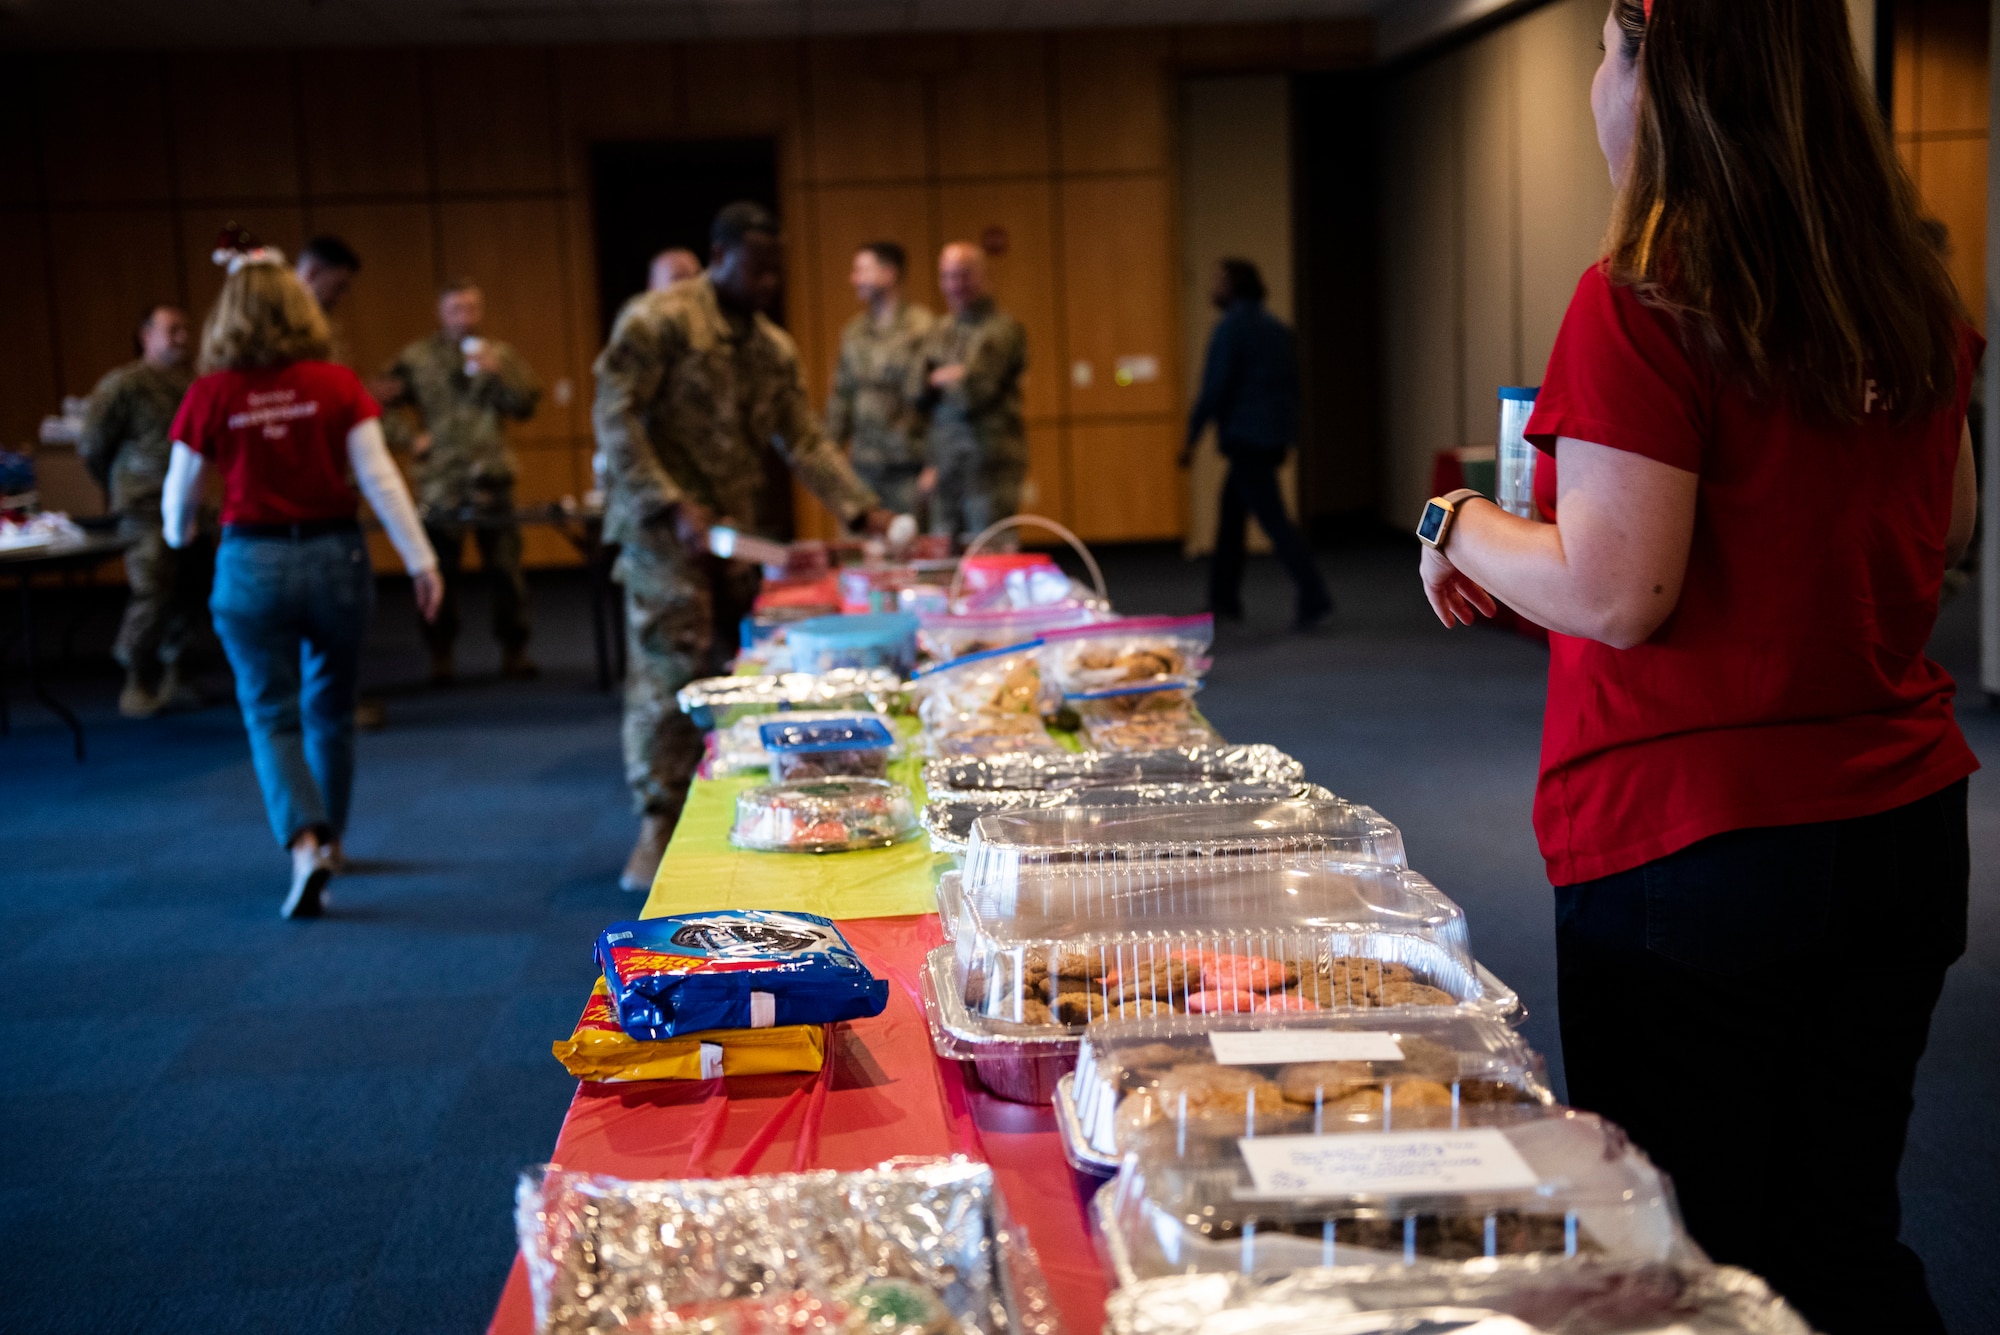 Members of the Tyndall Spouses Club and the Tyndall First Sergeants held a Cookie Caper event at Tyndall Air Force Base, Florida, Dec. 9, 2019. Hundreds of cookies where donated to the event, and were hand delivered to Airmen living in the on base dormitories. Extra cookies were distributed across the base to units and offices. (U.S. Air Force photo by Staff Sgt. Magen M. Reeves)